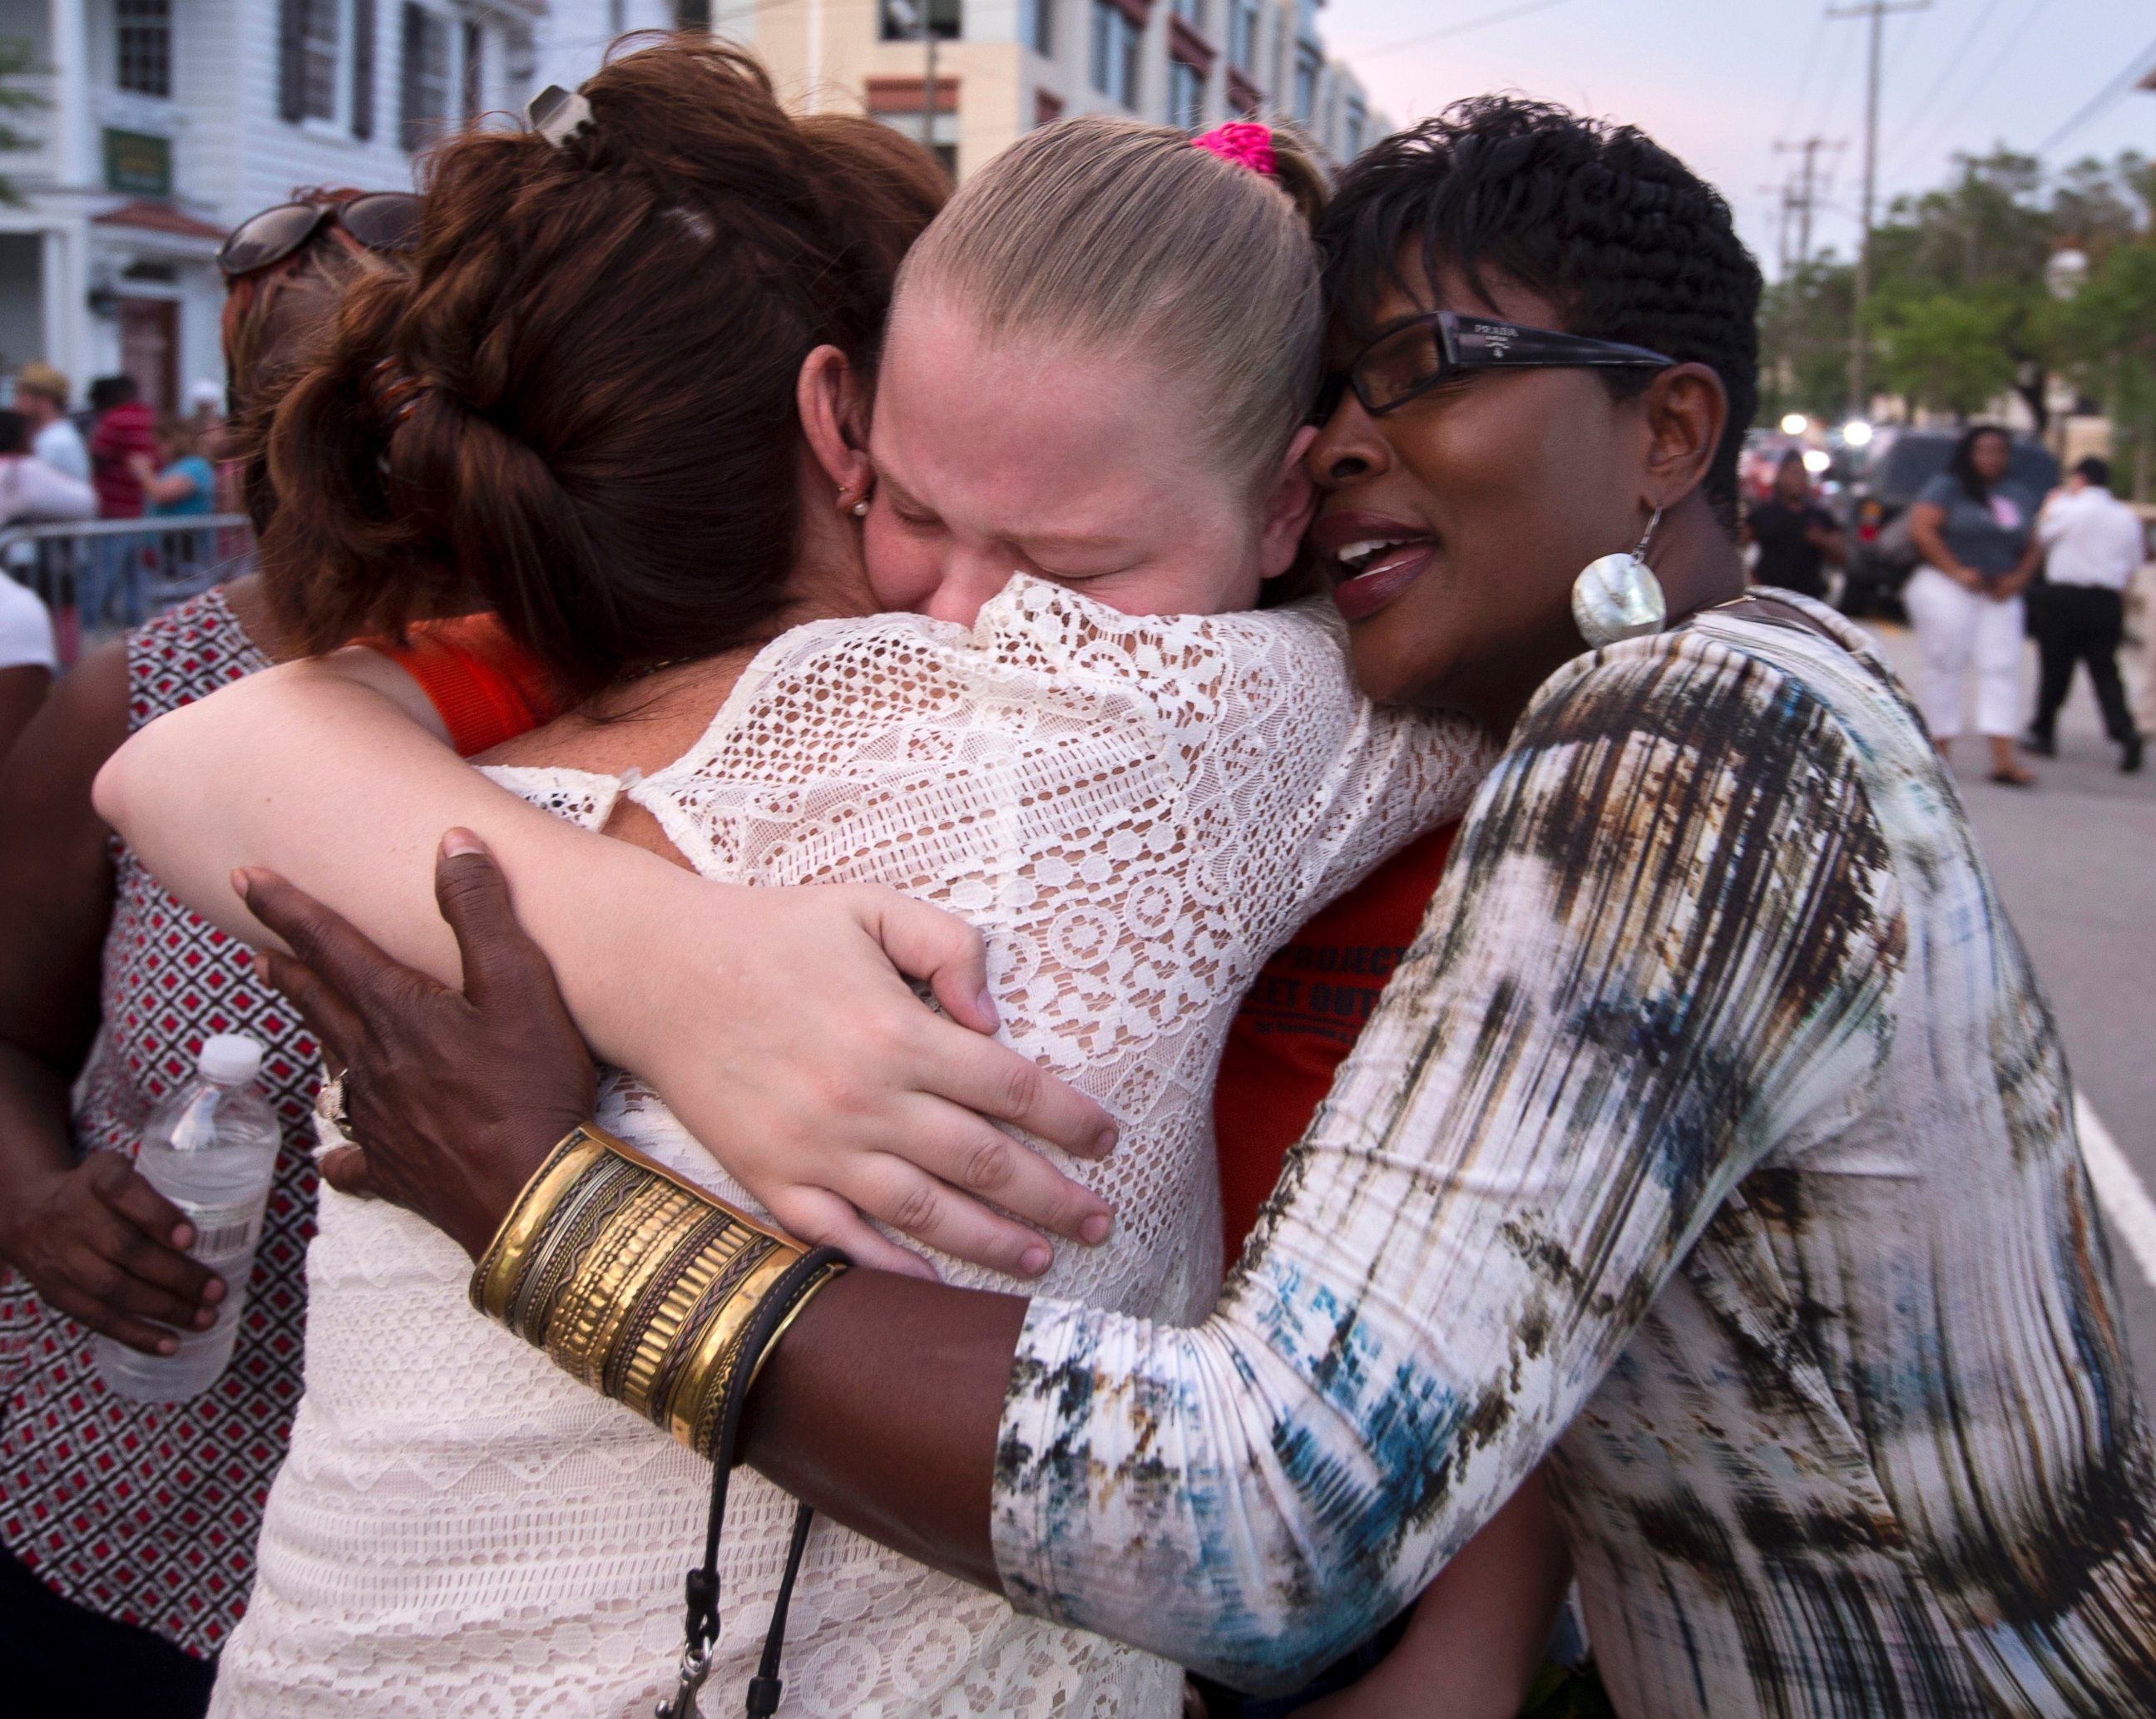 PHOTO: J. Denise Cromwell, left, hugs her daughter, Asia Cromwell, center, and a friend Sandy Teckledburg outside the Emanuel AME Church after a memorial in Charleston, S.C., June 19, 2015.